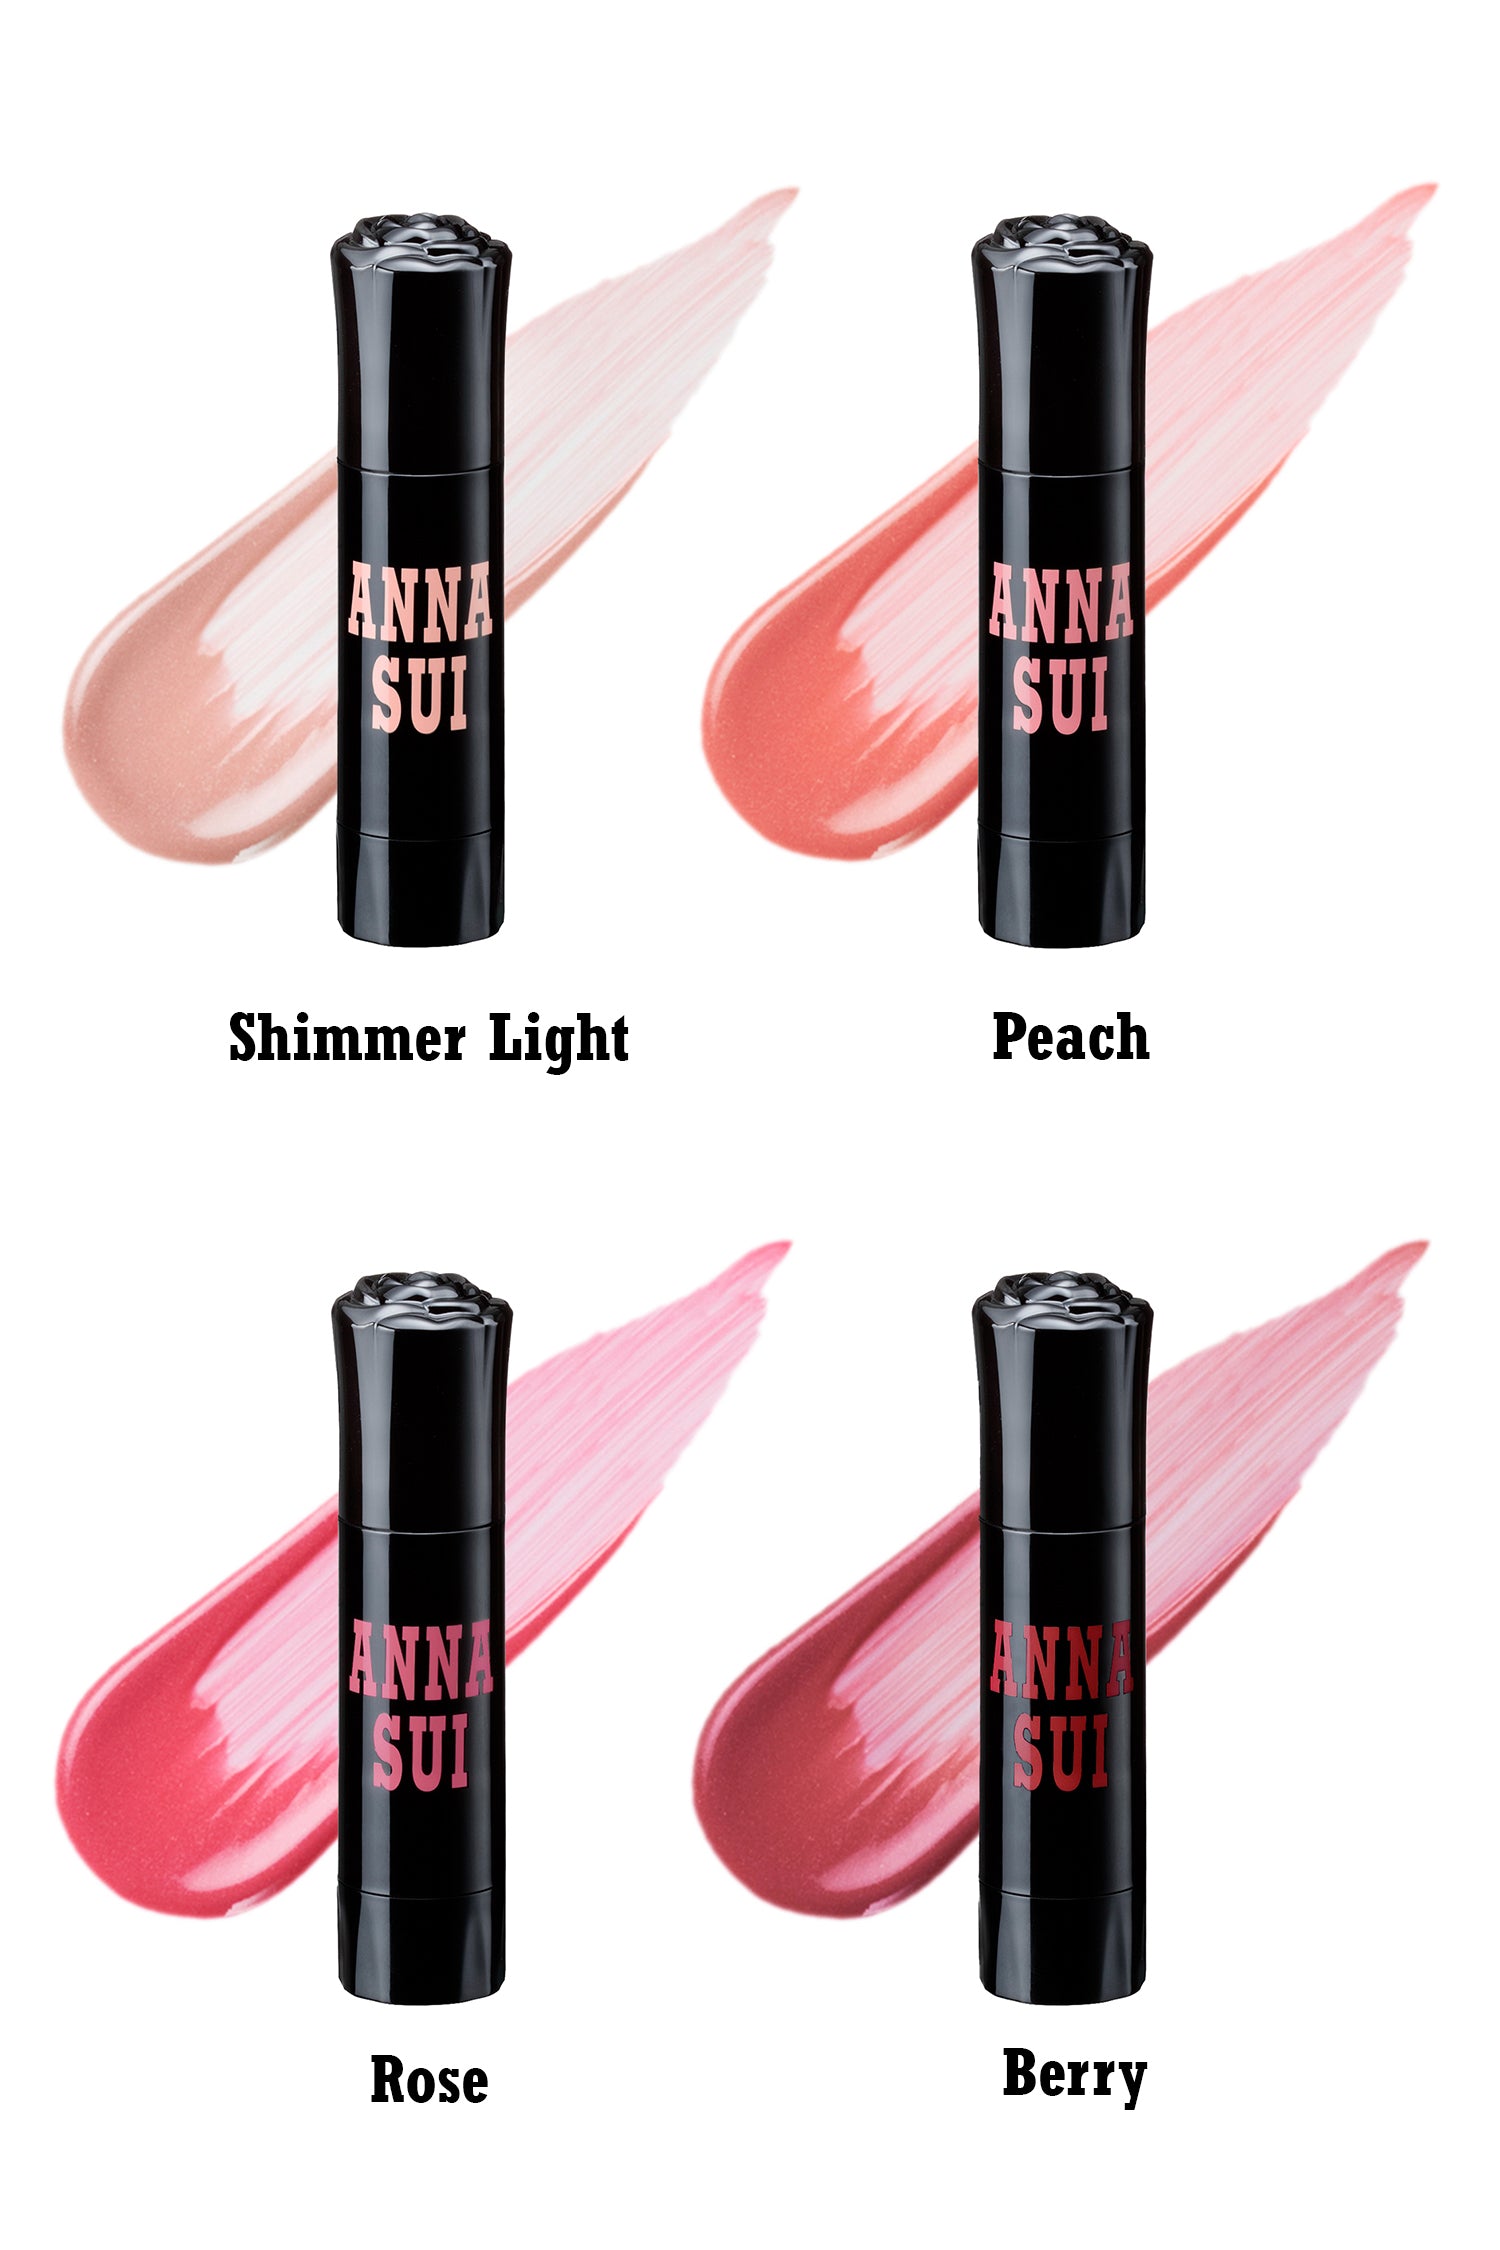 The 4 gradients of primer, SHIMMER - PEACH – ROSE – BERRY the cylinder with a rose on top match the color